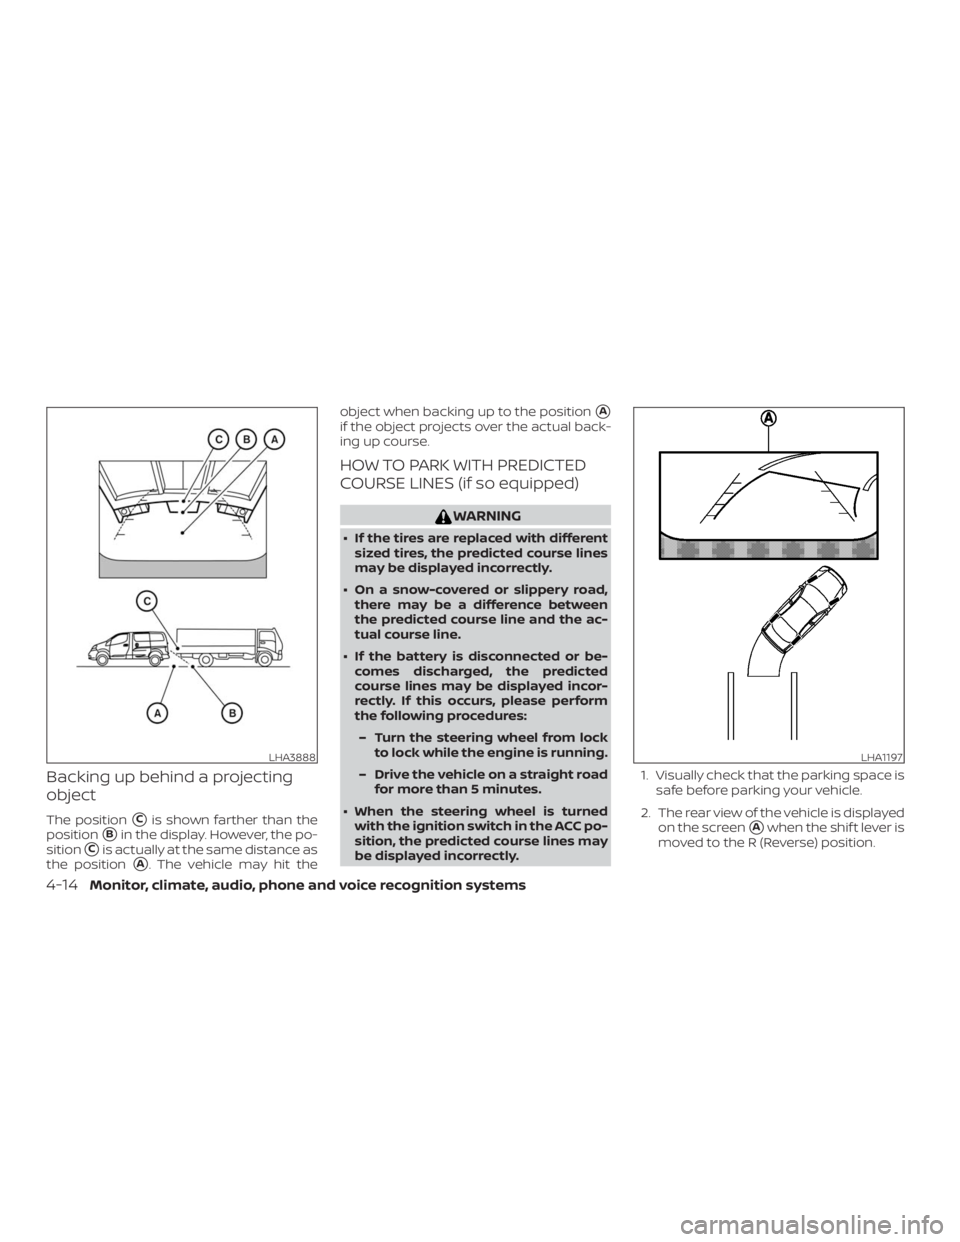 NISSAN NV200 2019  Owners Manual LHA3888LHA1197
4-14Monitor, climate, audio, phone and voice recognition systems 